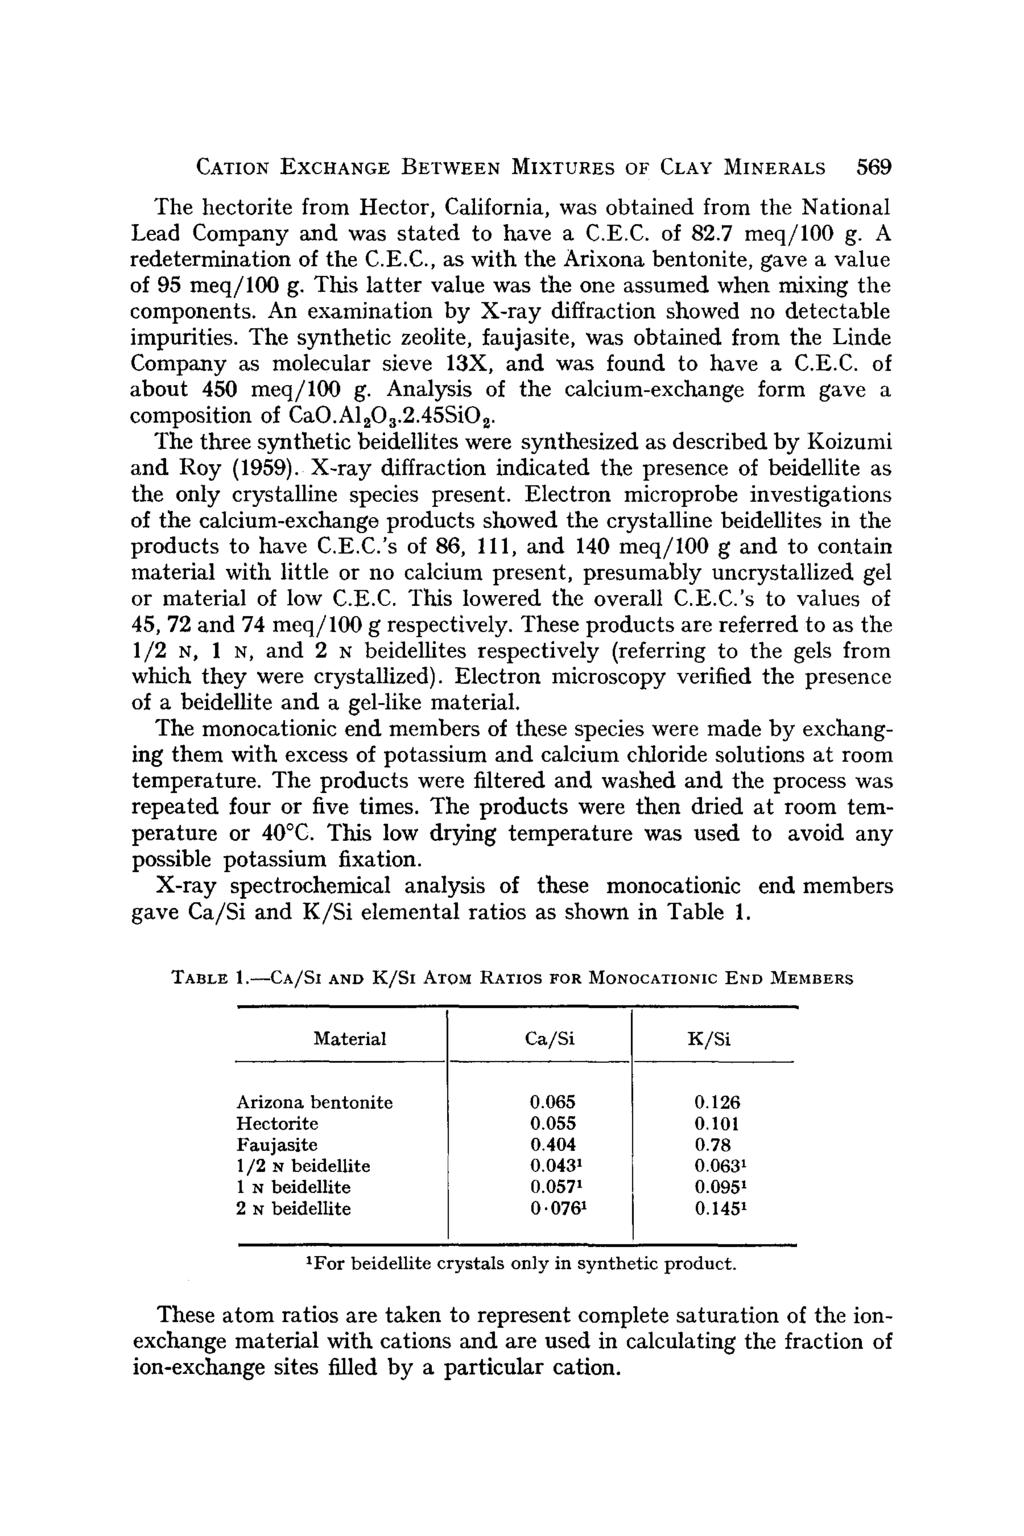 CATION EXCHANGE BETWEEN MIXTURES OF CLAY MINERALS 569 The hectorite from Hector, California, was obtained from the National Lead Company and was stated to have a C.E.C. of 82.7 meq/100 g.